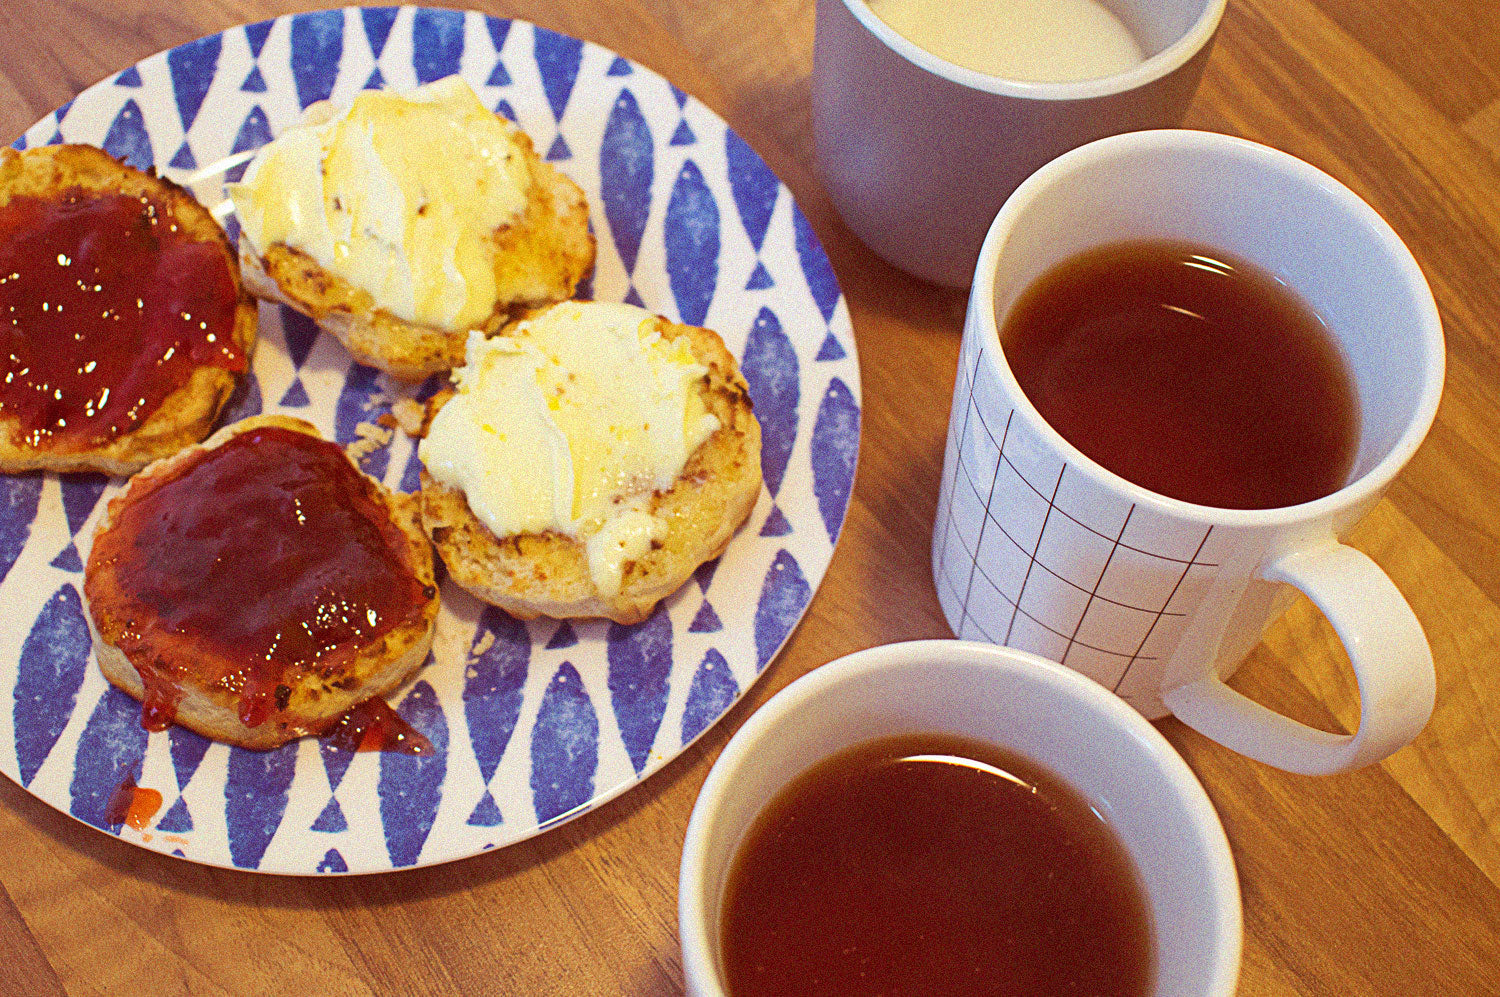 Afternoon tea: Not just for cakes.